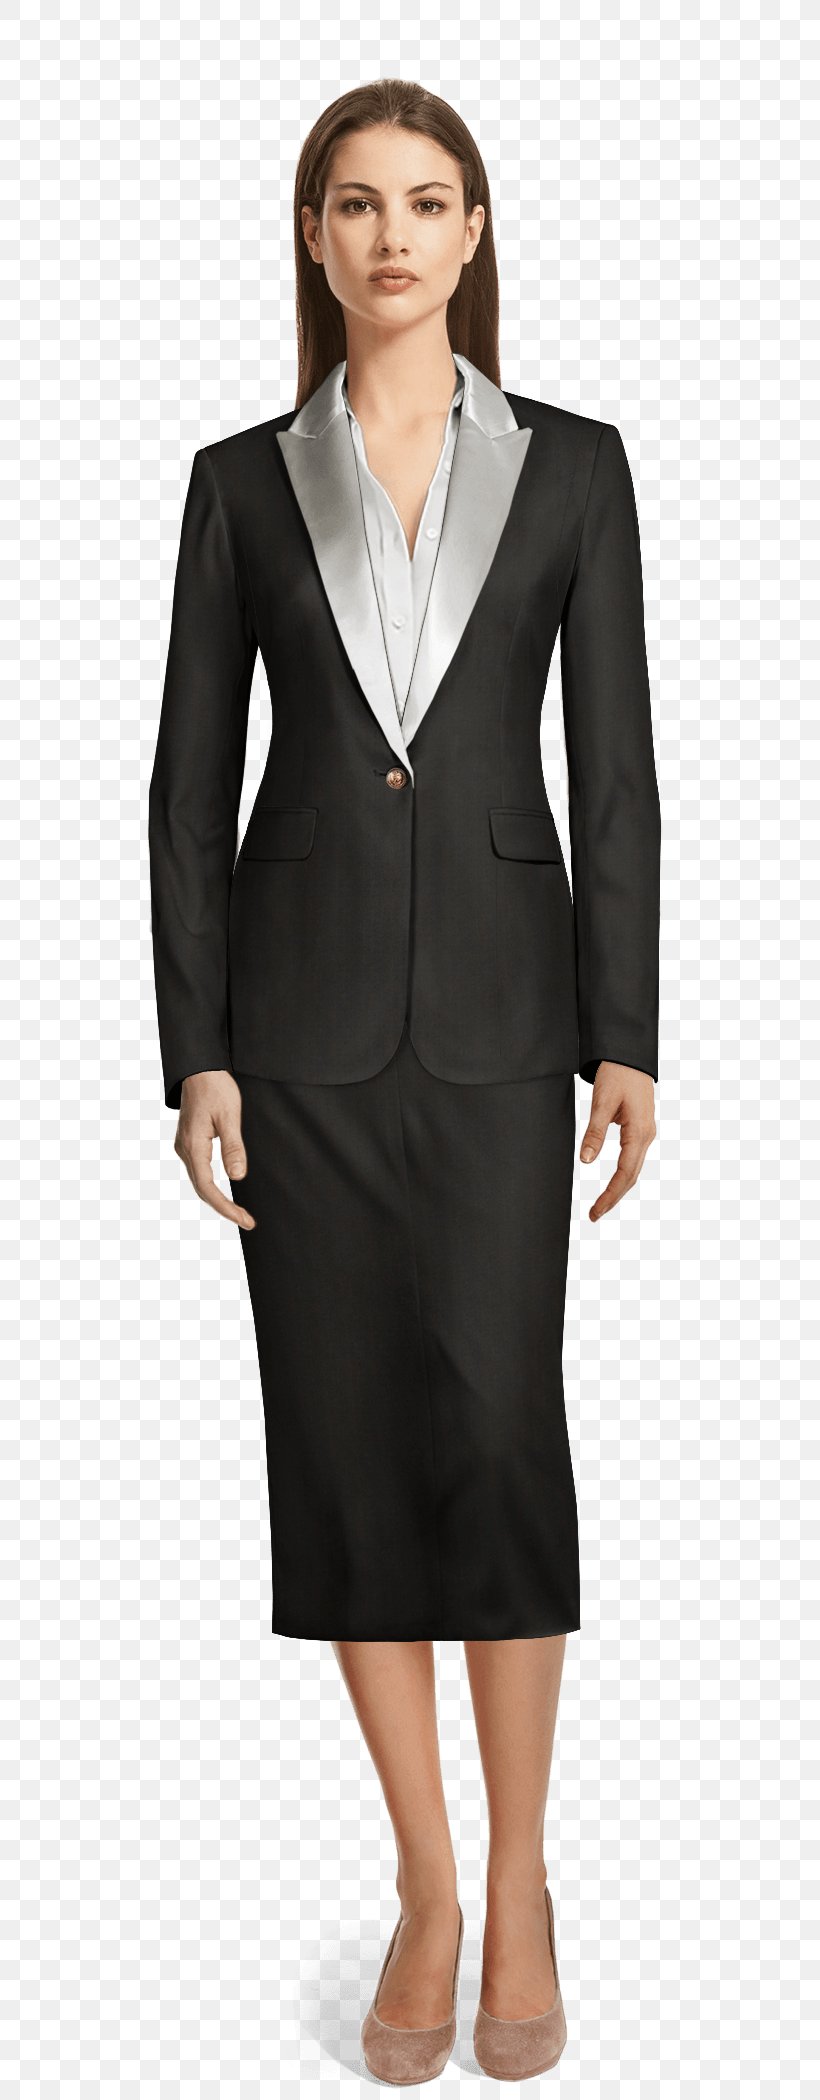 Tuxedo Lapel Suit Double-breasted Single-breasted, PNG, 655x2100px, Tuxedo, Black, Blazer, Business, Businessperson Download Free